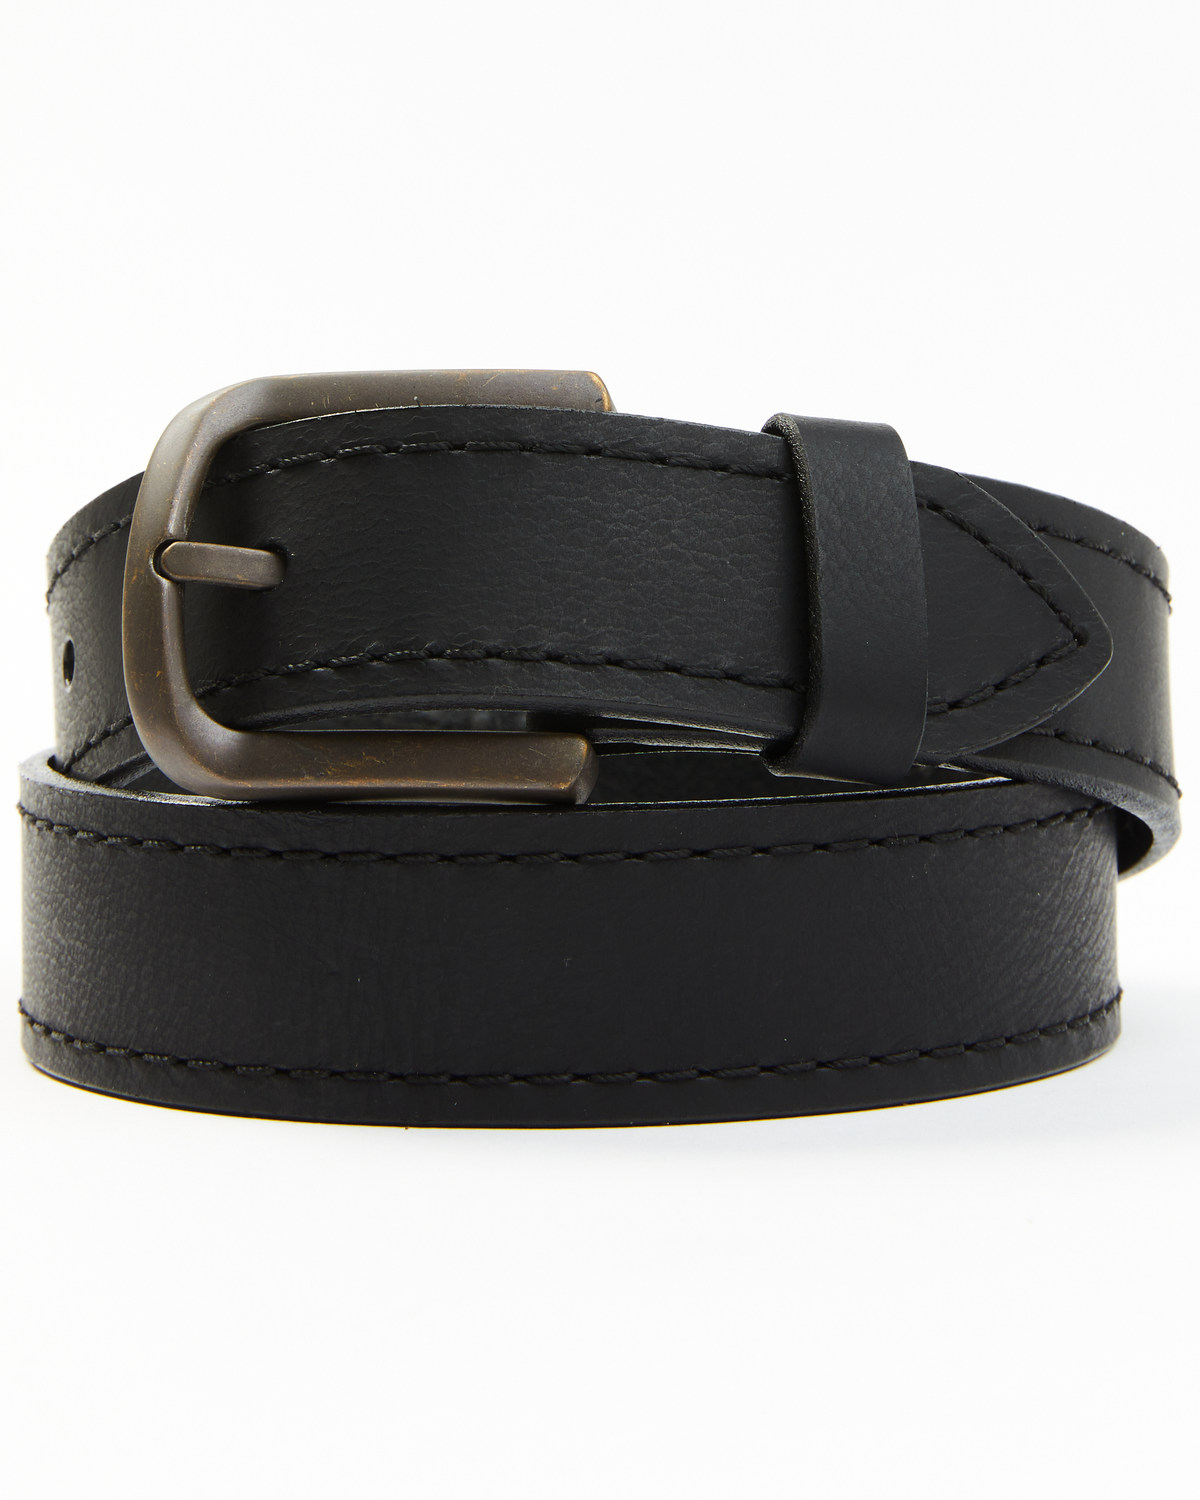 Brothers and Sons Men's Lagos Brass Buckle Belt